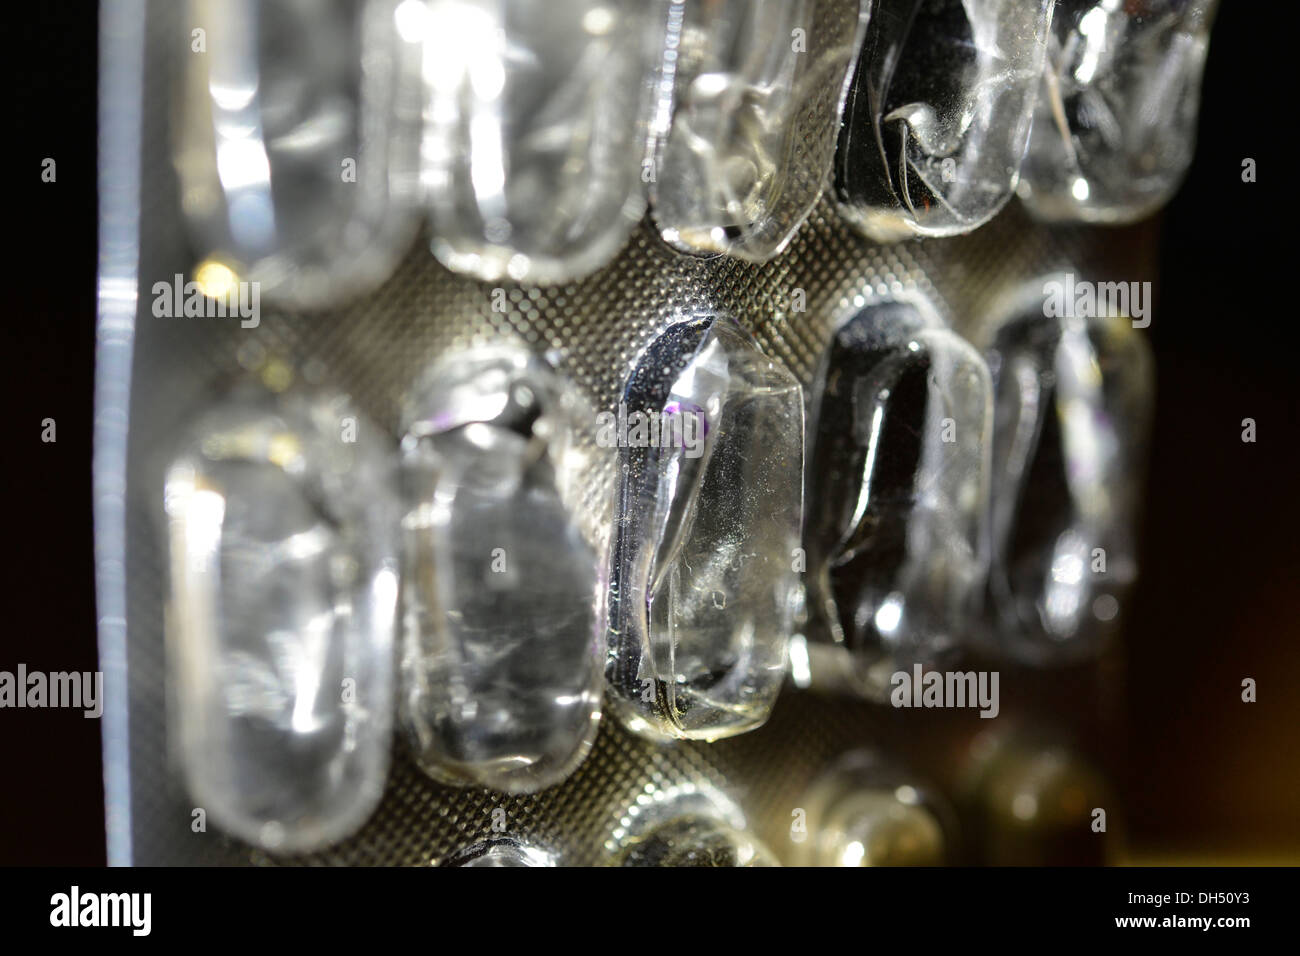 Empty blister pack of tablets Stock Photo